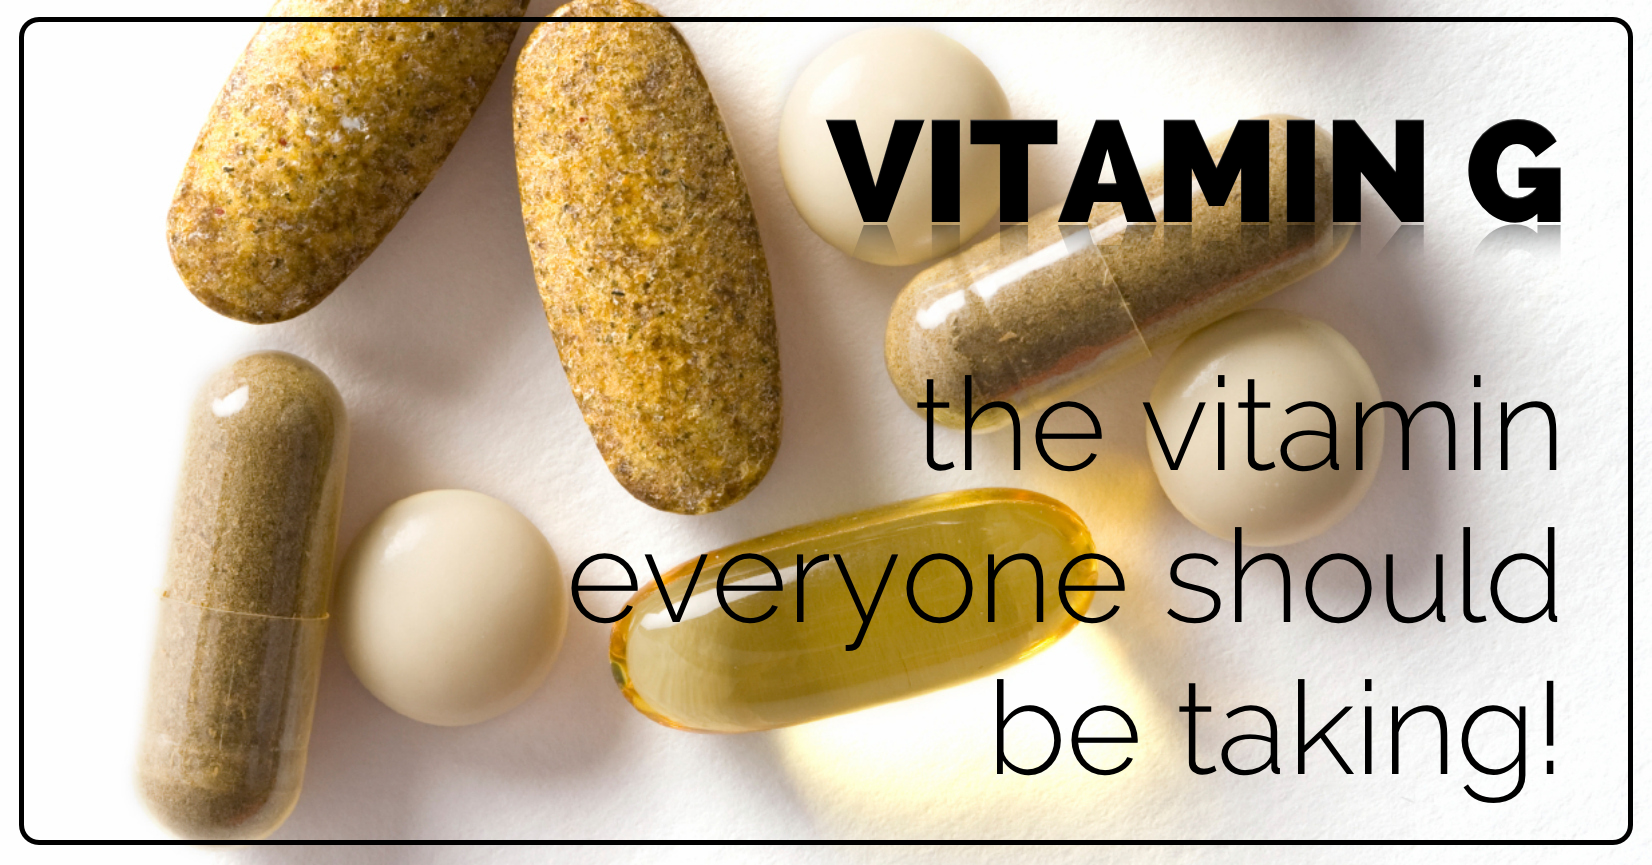 Vitamin G | The vitamin everyone should be taking. healthylivinghowto.com